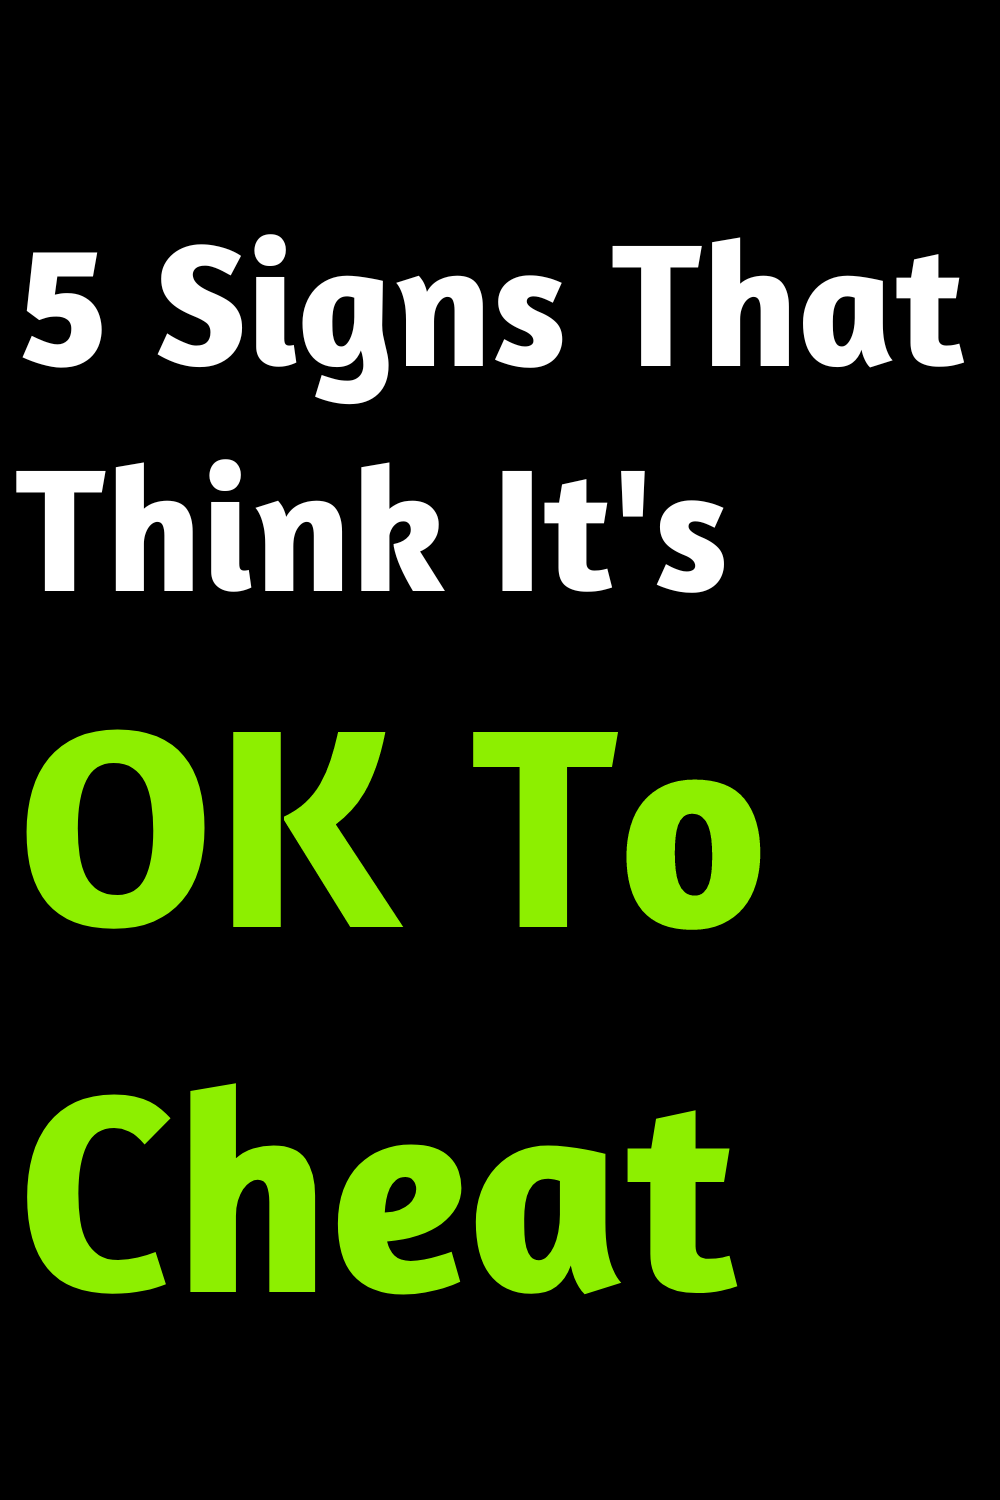 5 Signs That Think It's OK To Cheat